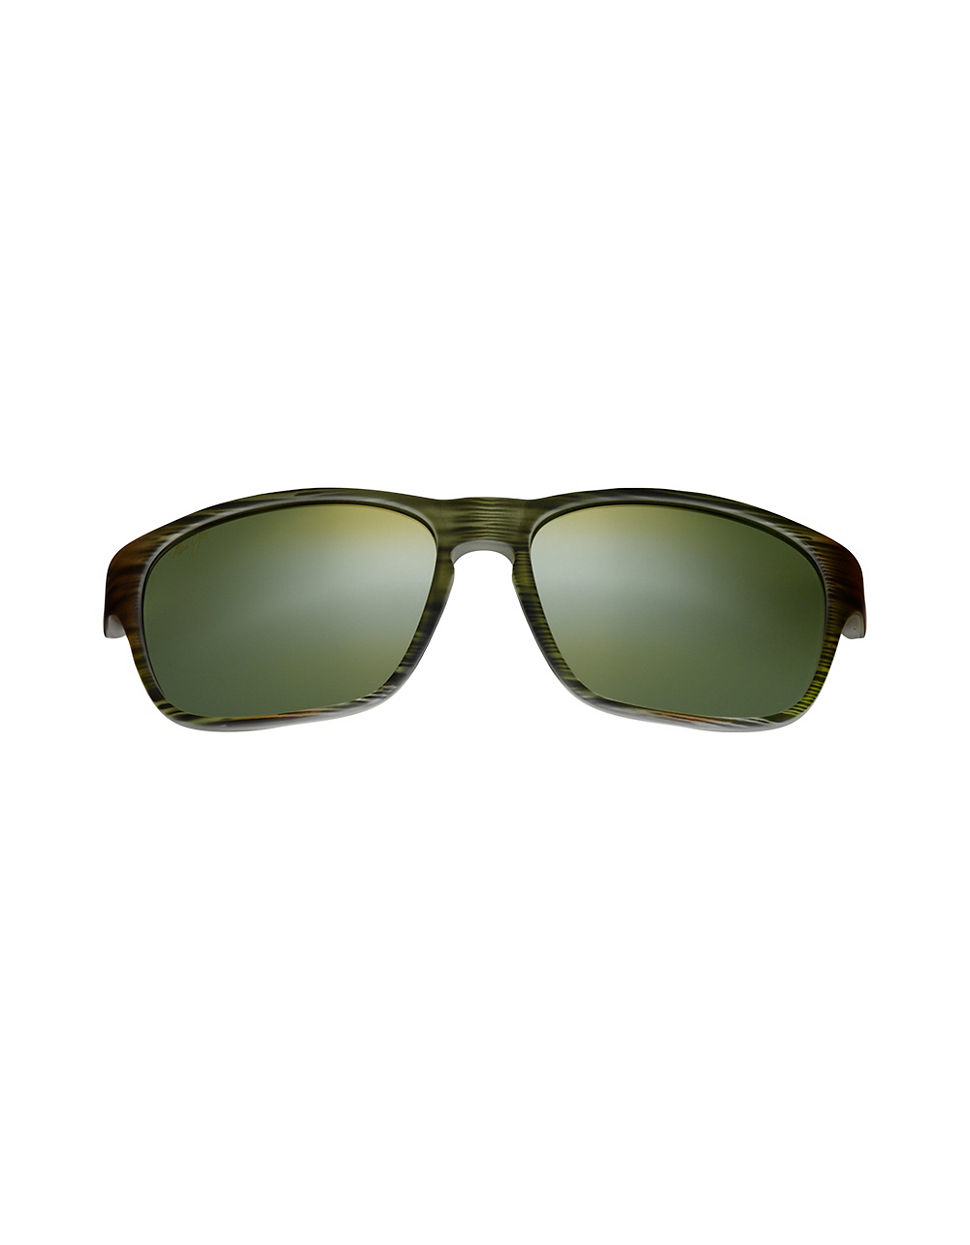 Lyst - Maui jim Mixed Plate Sunglasses in Green for Men